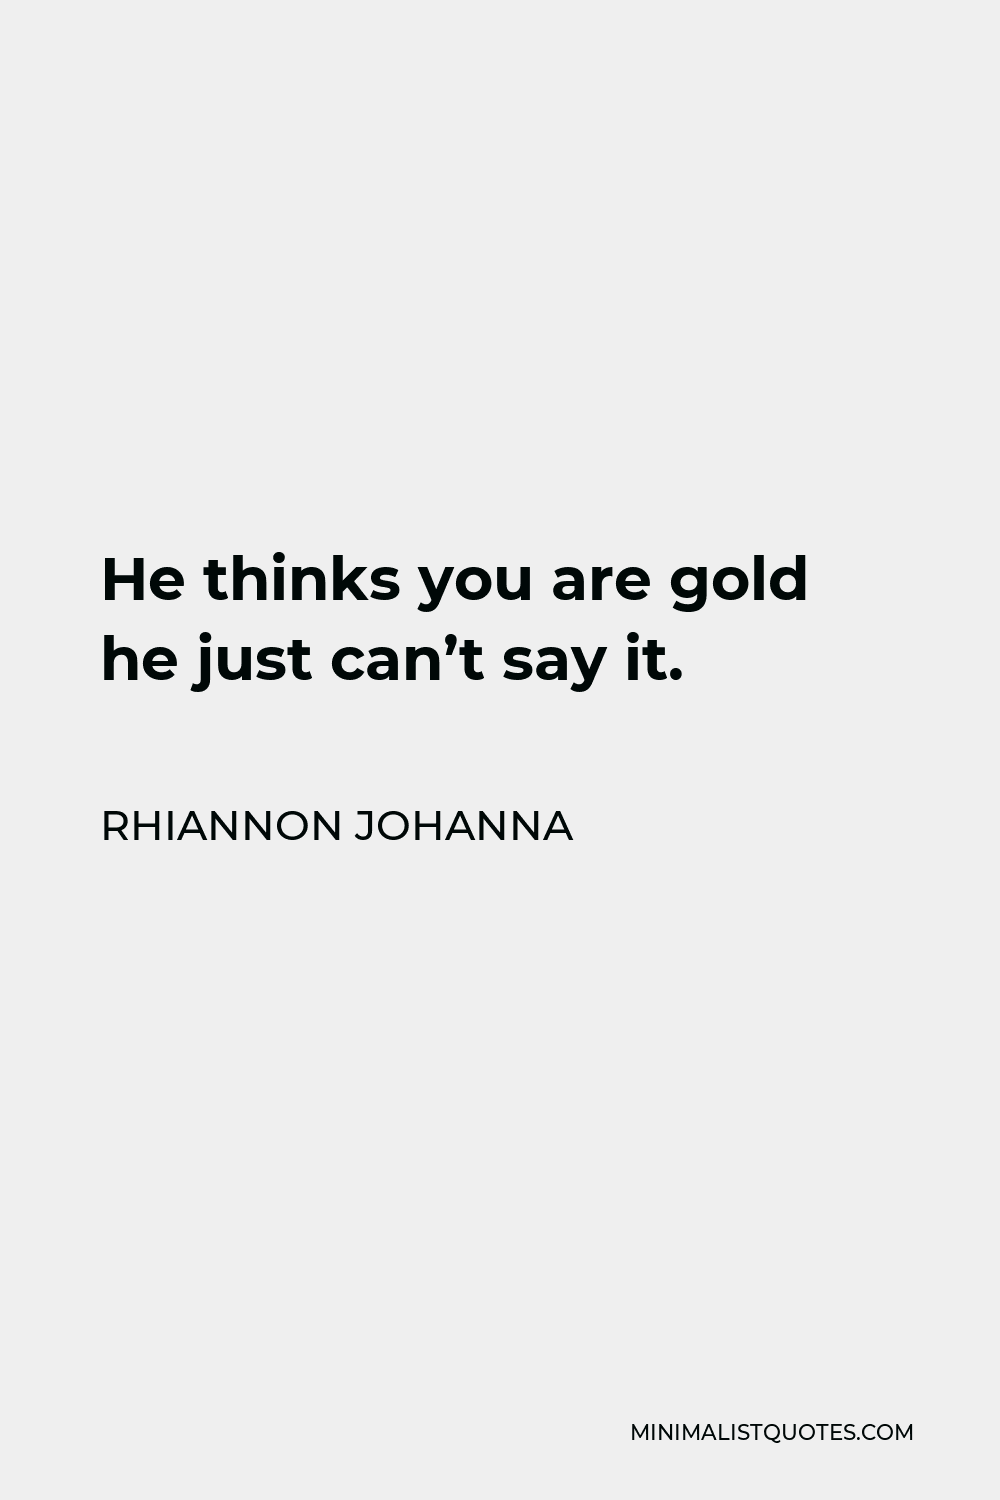 Rhiannon Johanna Quote - He thinks you are gold he just can’t say it.